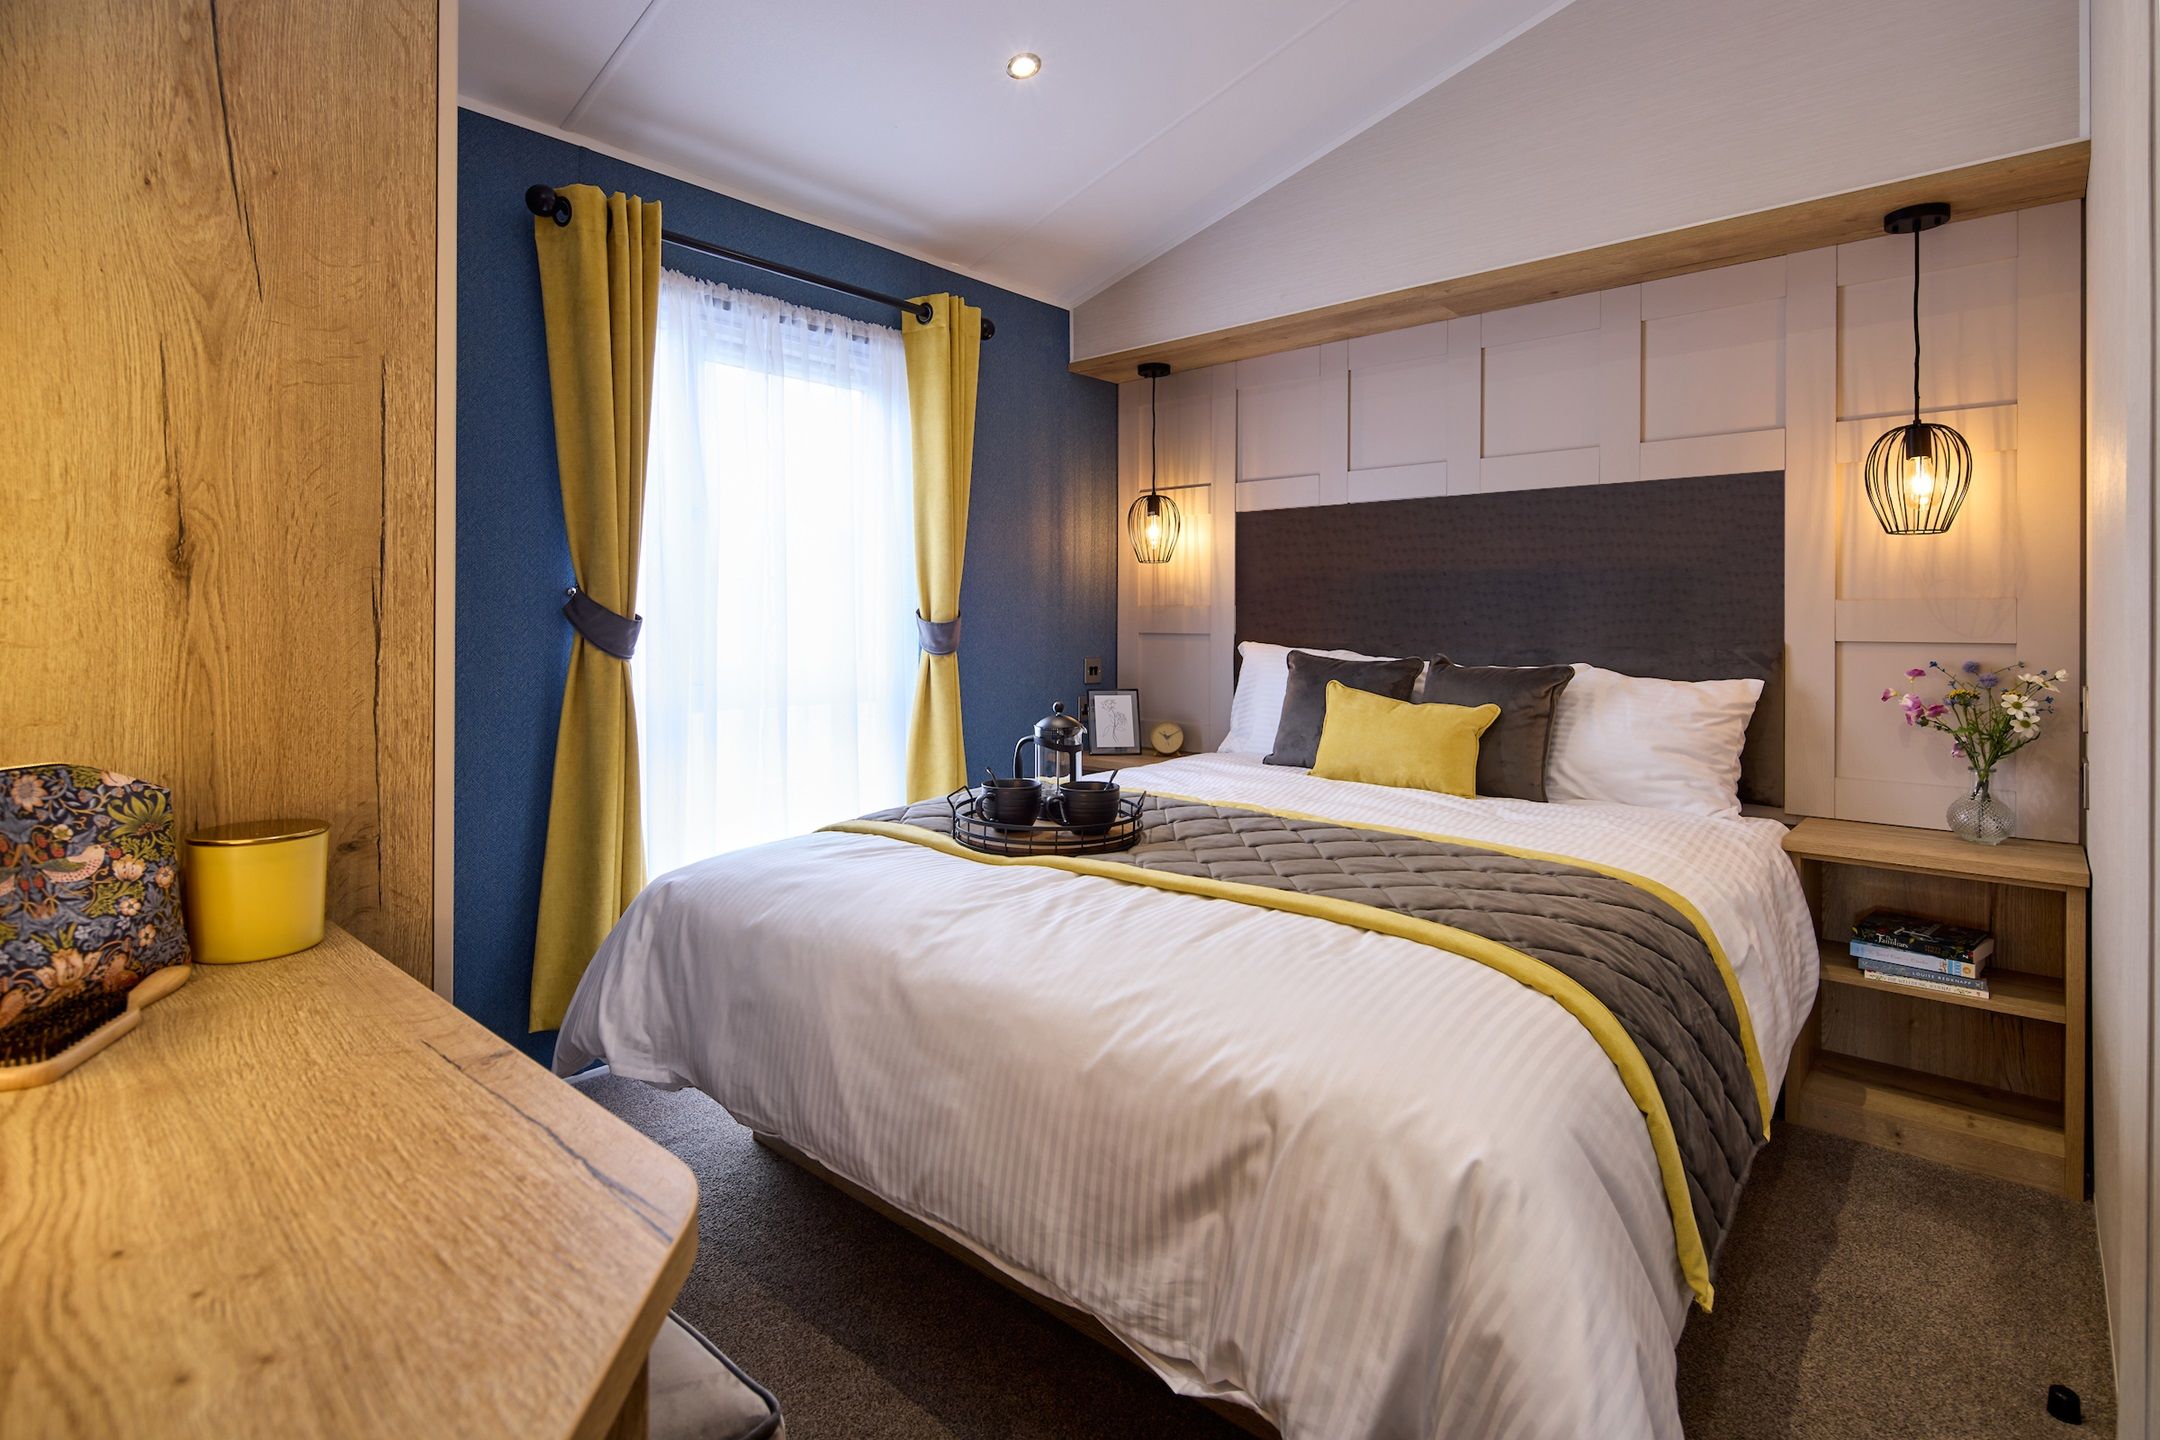 The lodges provided by Willerby for the Butlin’s expansion of its resort in Skegness have a main bedroom, complete with a king-sized bed and en-suite shower room, and two twin rooms.